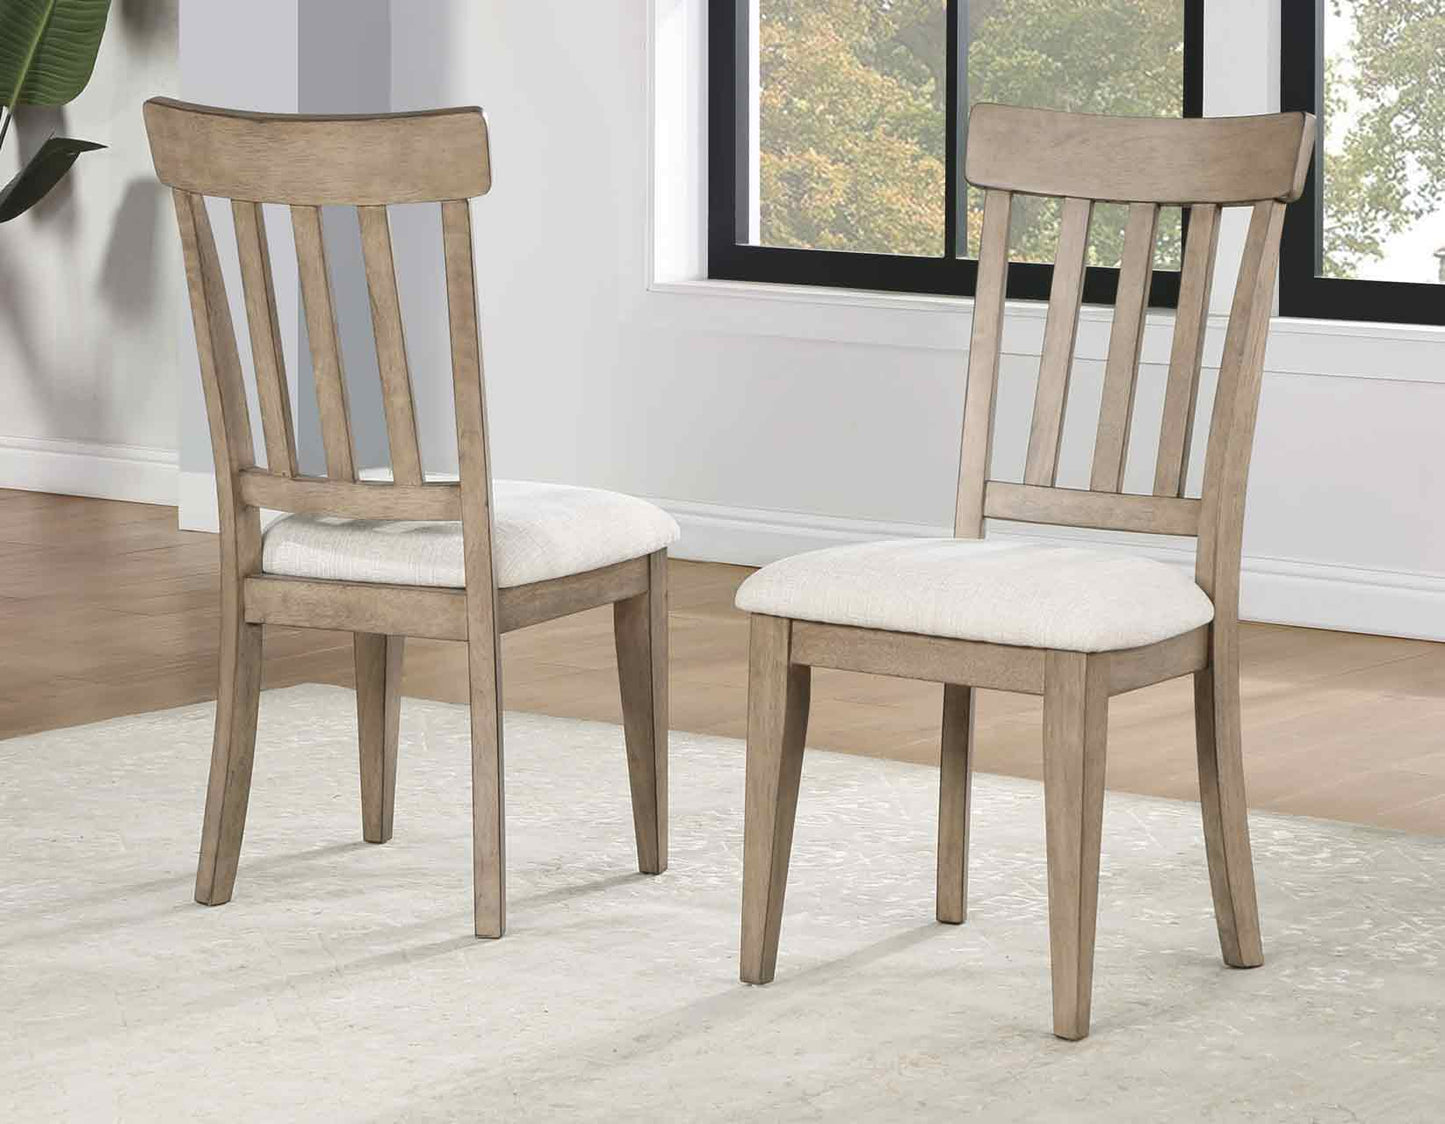 Napa 5-Piece 72-108-inch Dining Set, Sand
(Table & 4 Side Chairs)